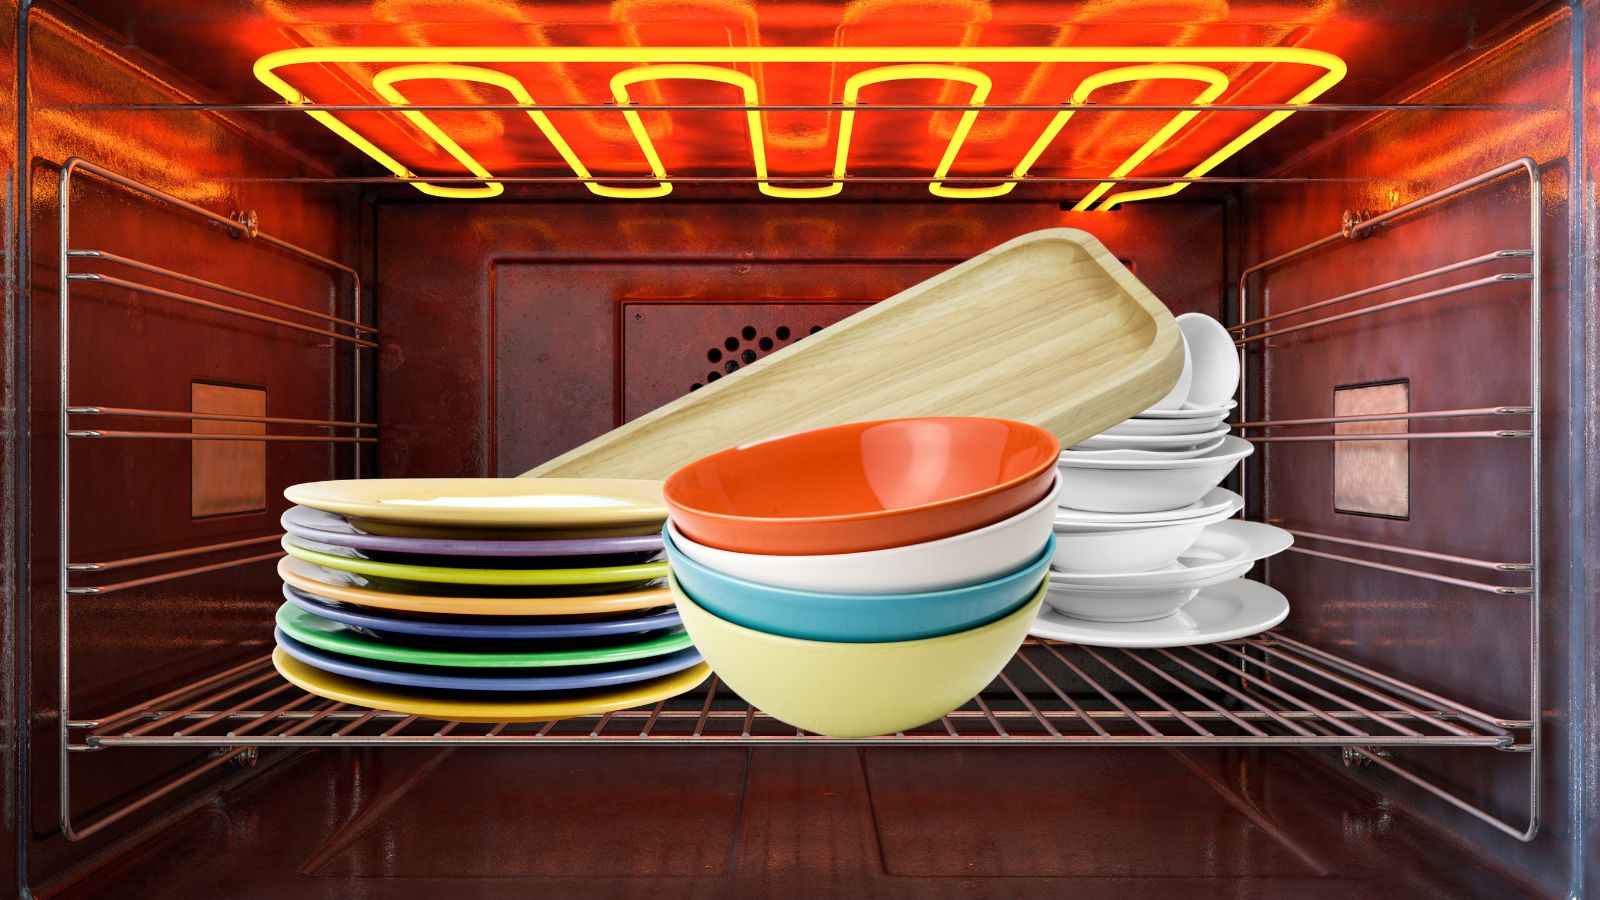 Different types of plates in the oven - familyguidecentral.com